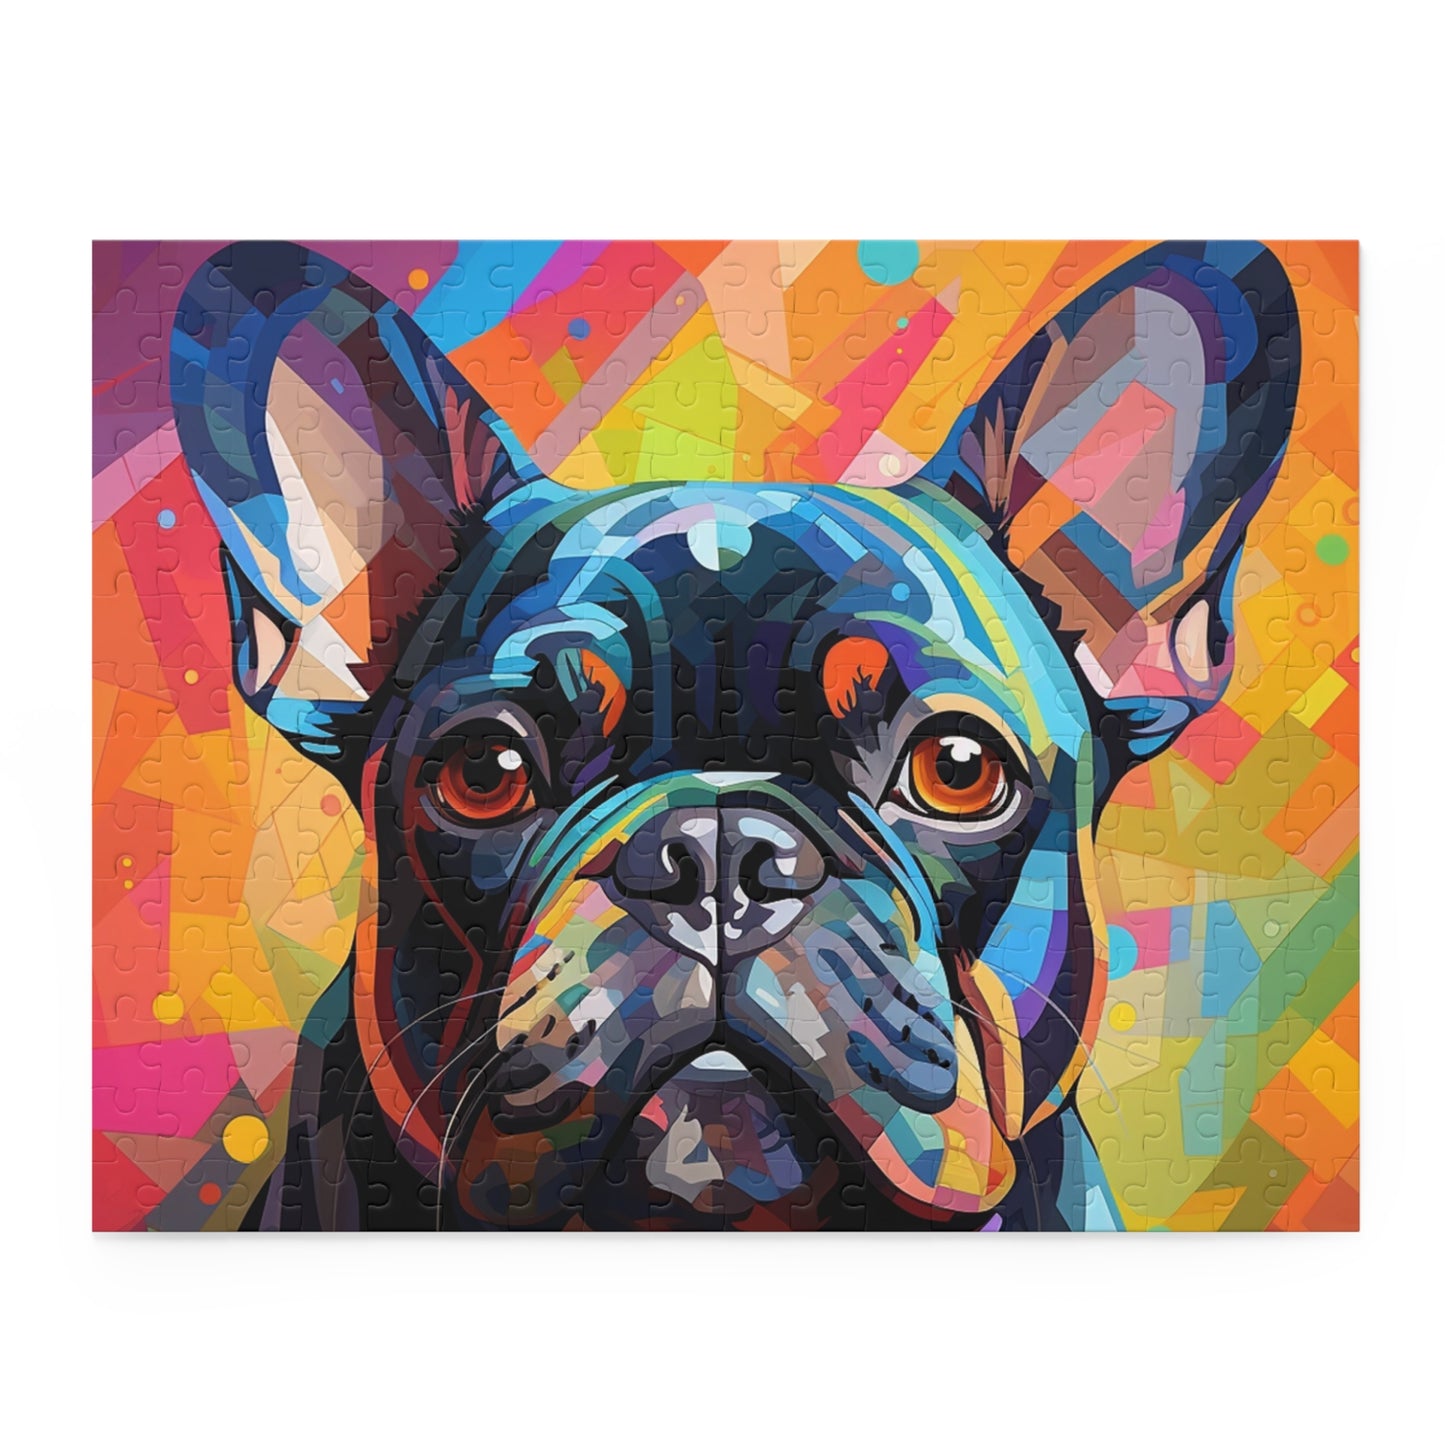 Abstract Frenchie Oil Paint Dog Jigsaw Puzzle Adult Birthday Business Jigsaw Puzzle Gift for Him Funny Humorous Indoor Outdoor Game Gift For Her Online-3